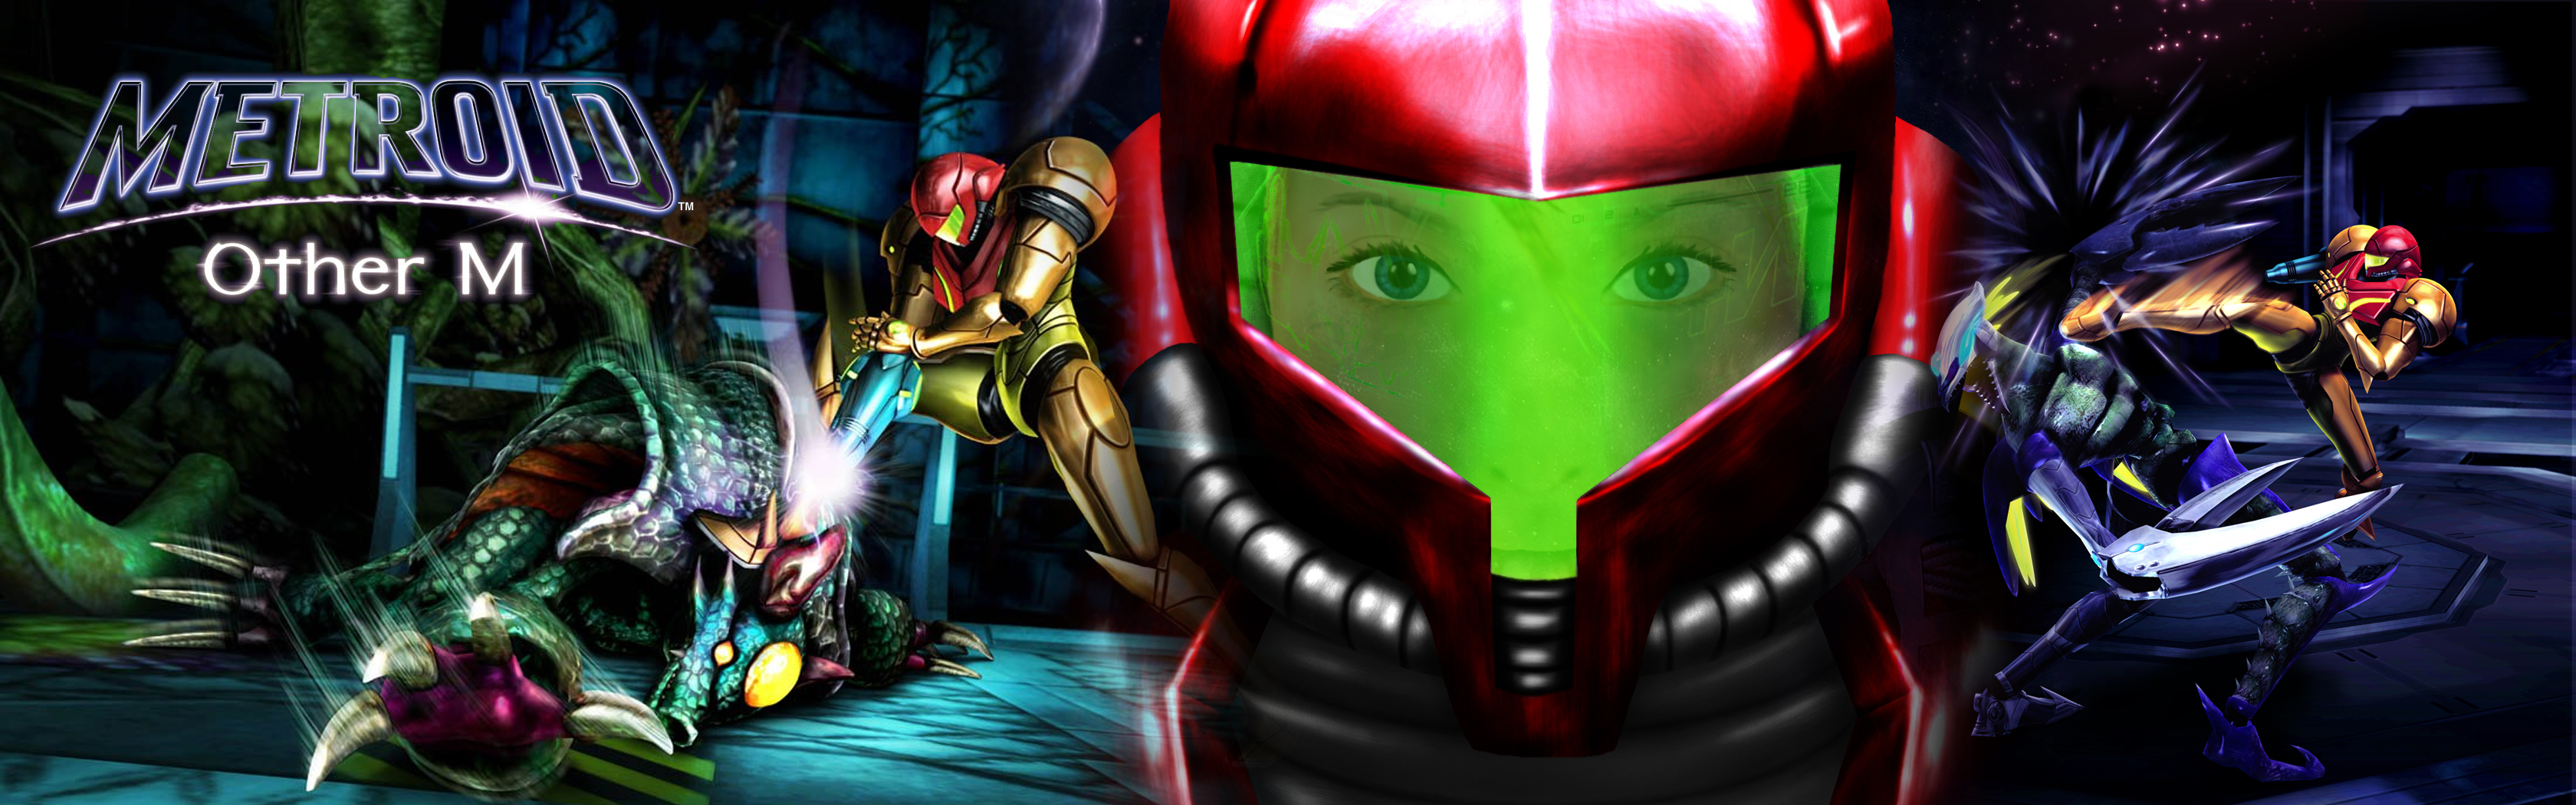 video game, metroid: other m